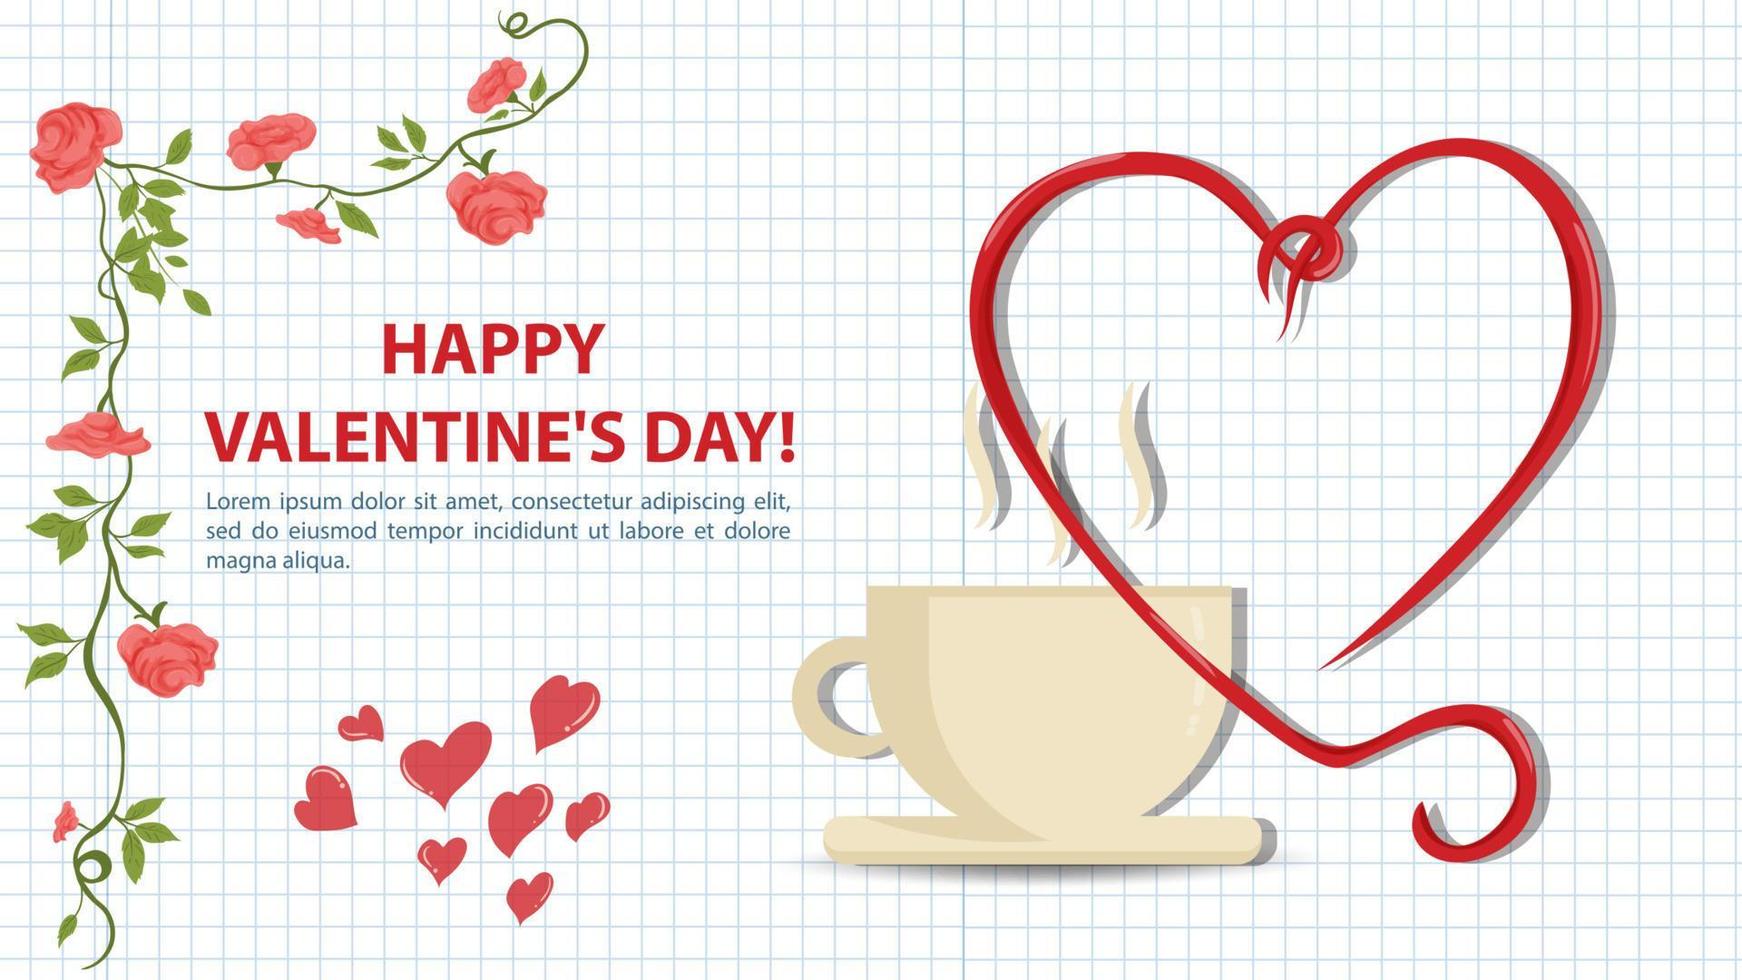 Illustration in a flat style for the Valentines Day holiday a frame of flowers in the middle a heart with curls next to a cup on a saucer background a notebook sheet in a cage vector